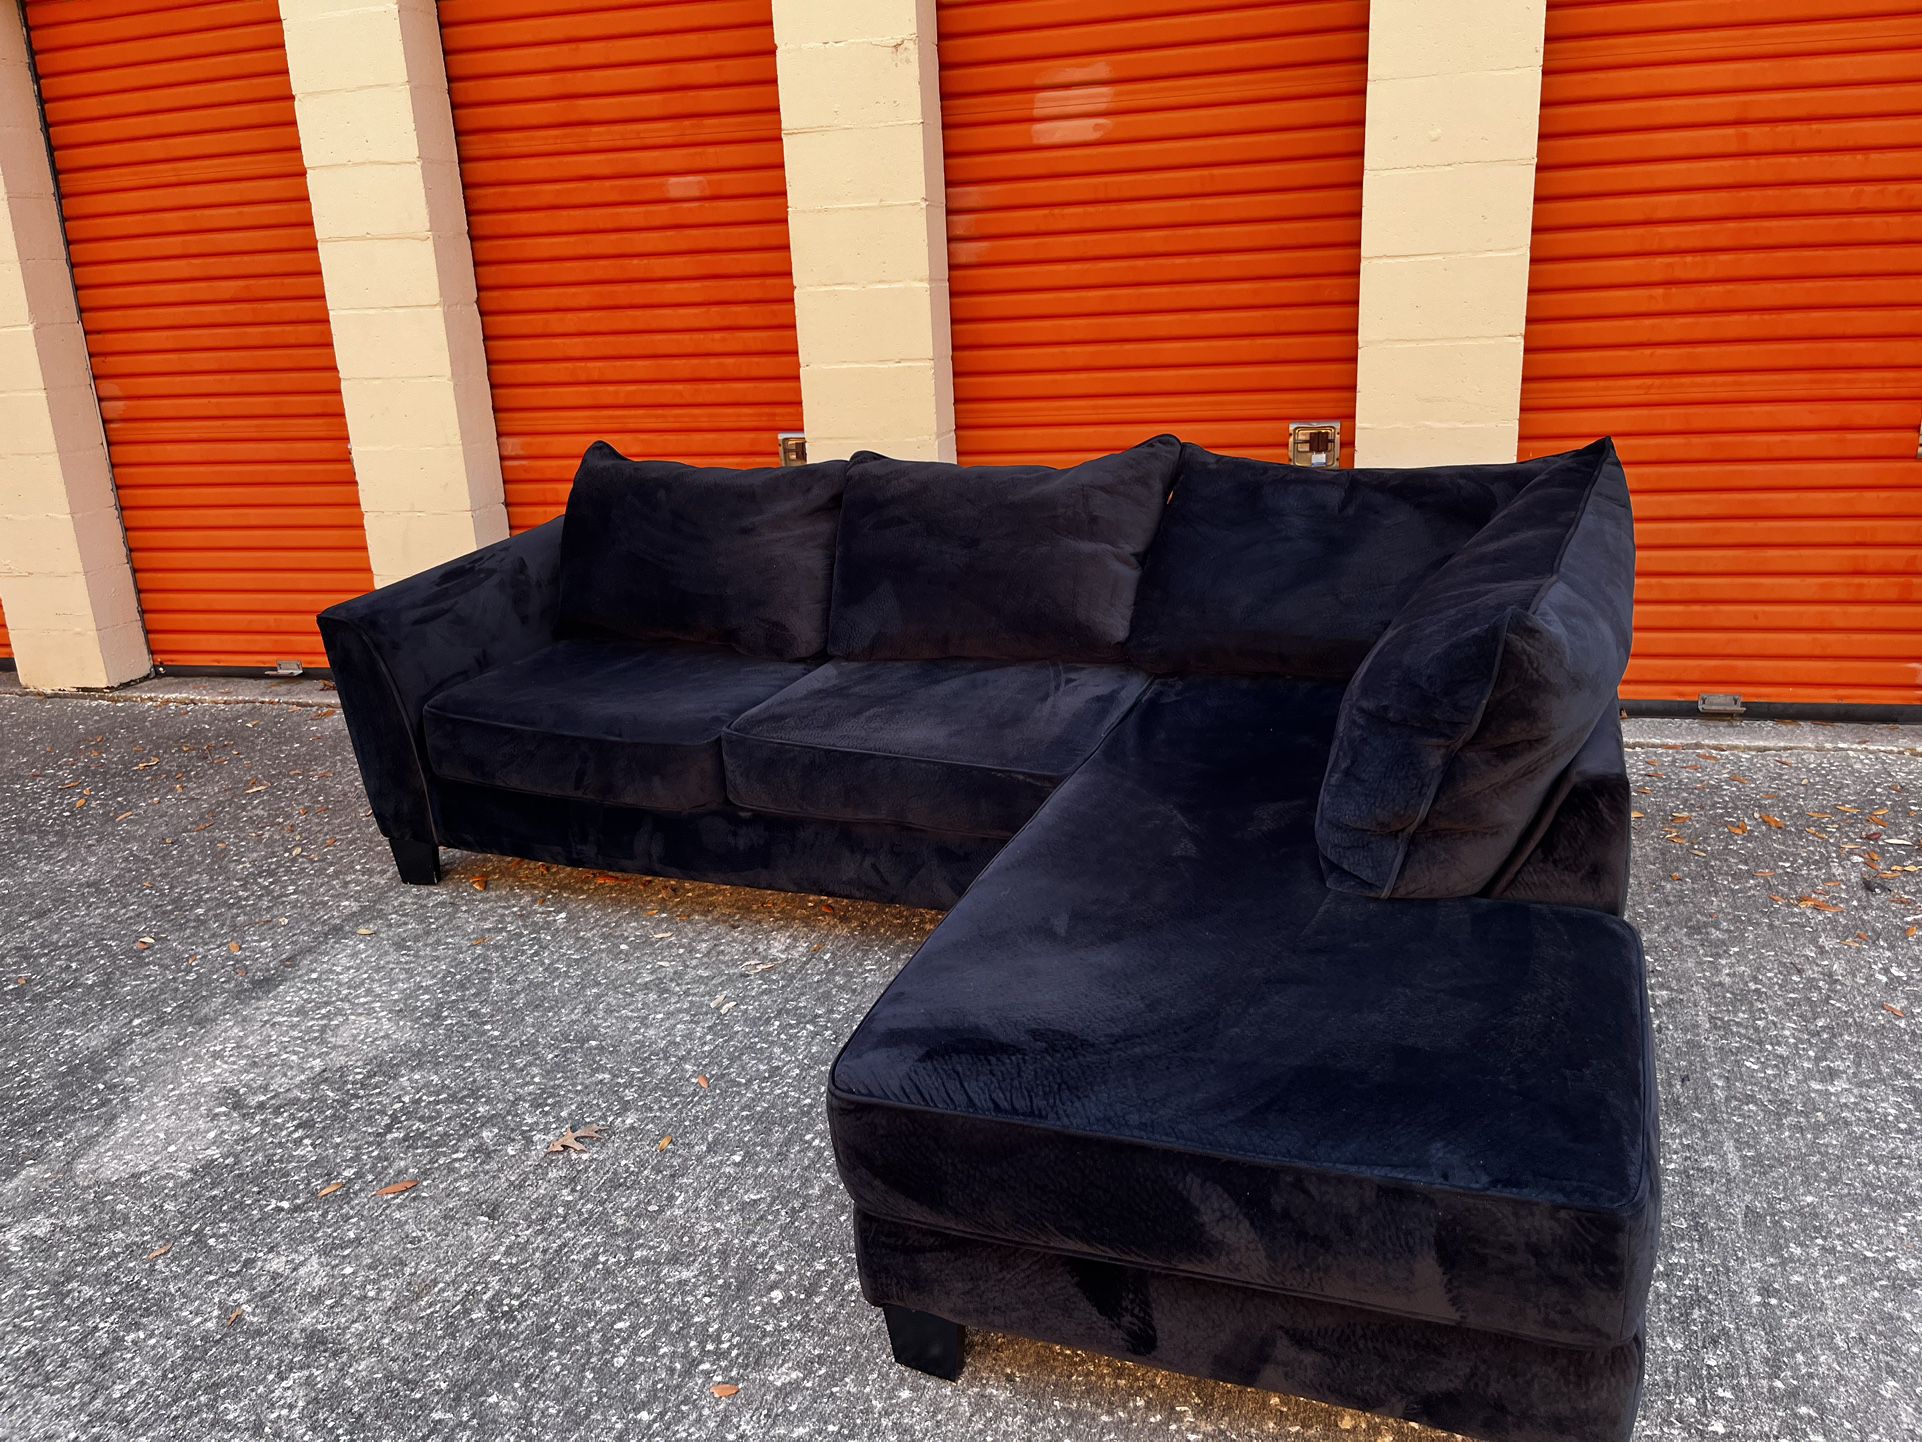 Nice Black Sectional Couch. Delivery Available!